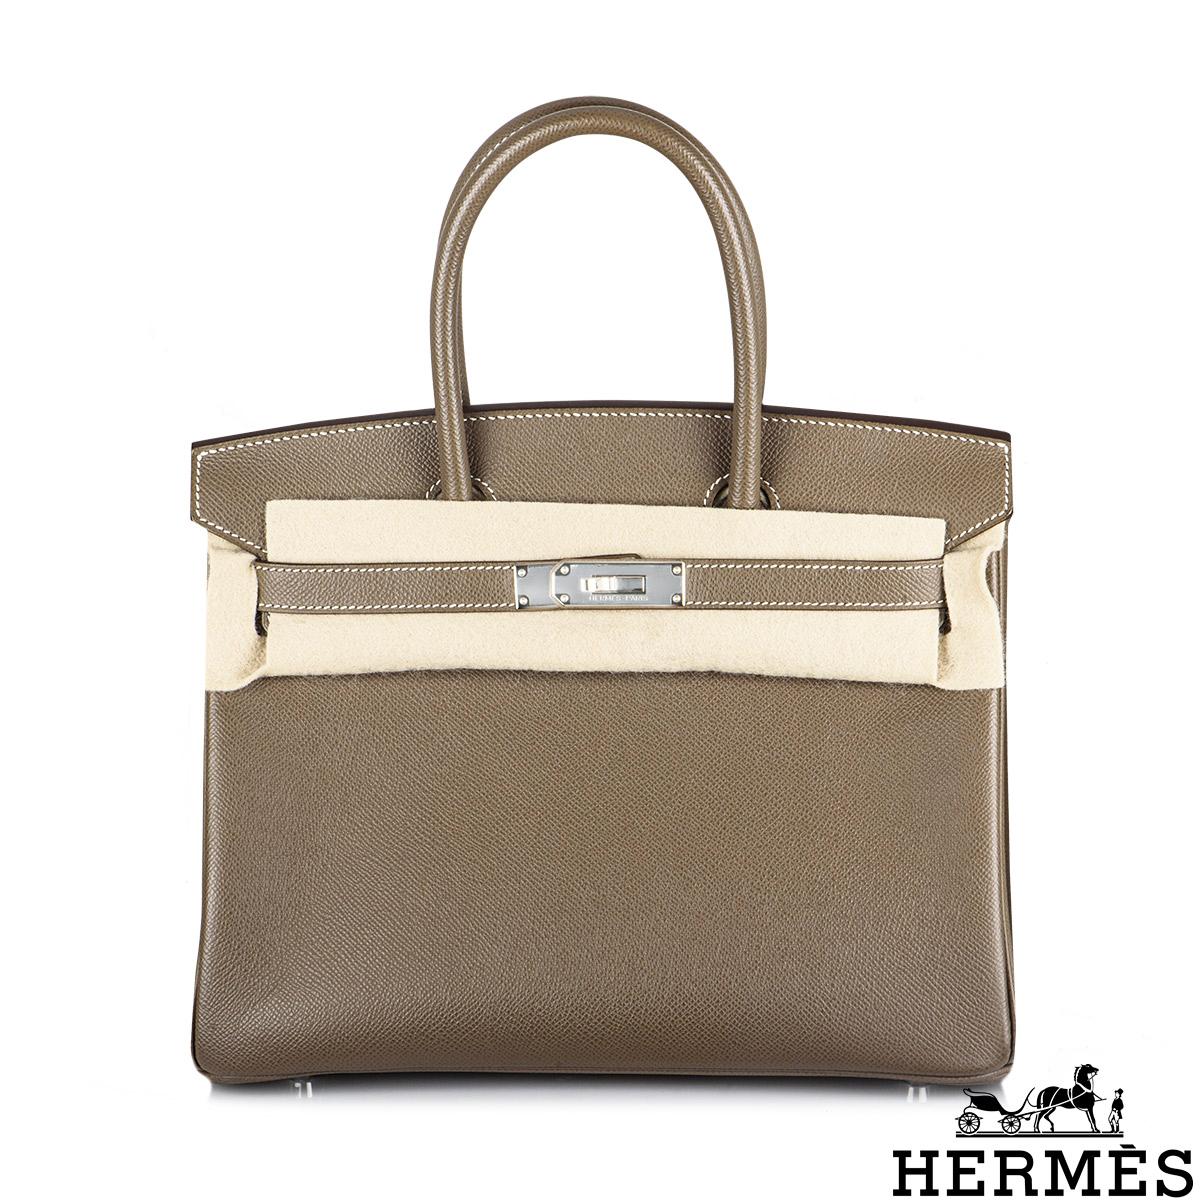 A classic Hermès 30cm Birkin bag. The exterior of this Birkin is in Etoupe Veau Epsom leather with white stitching. It features palladium hardware with two straps and front toggle closure. The interior has a zip pocket with an Hermès engraved zipper